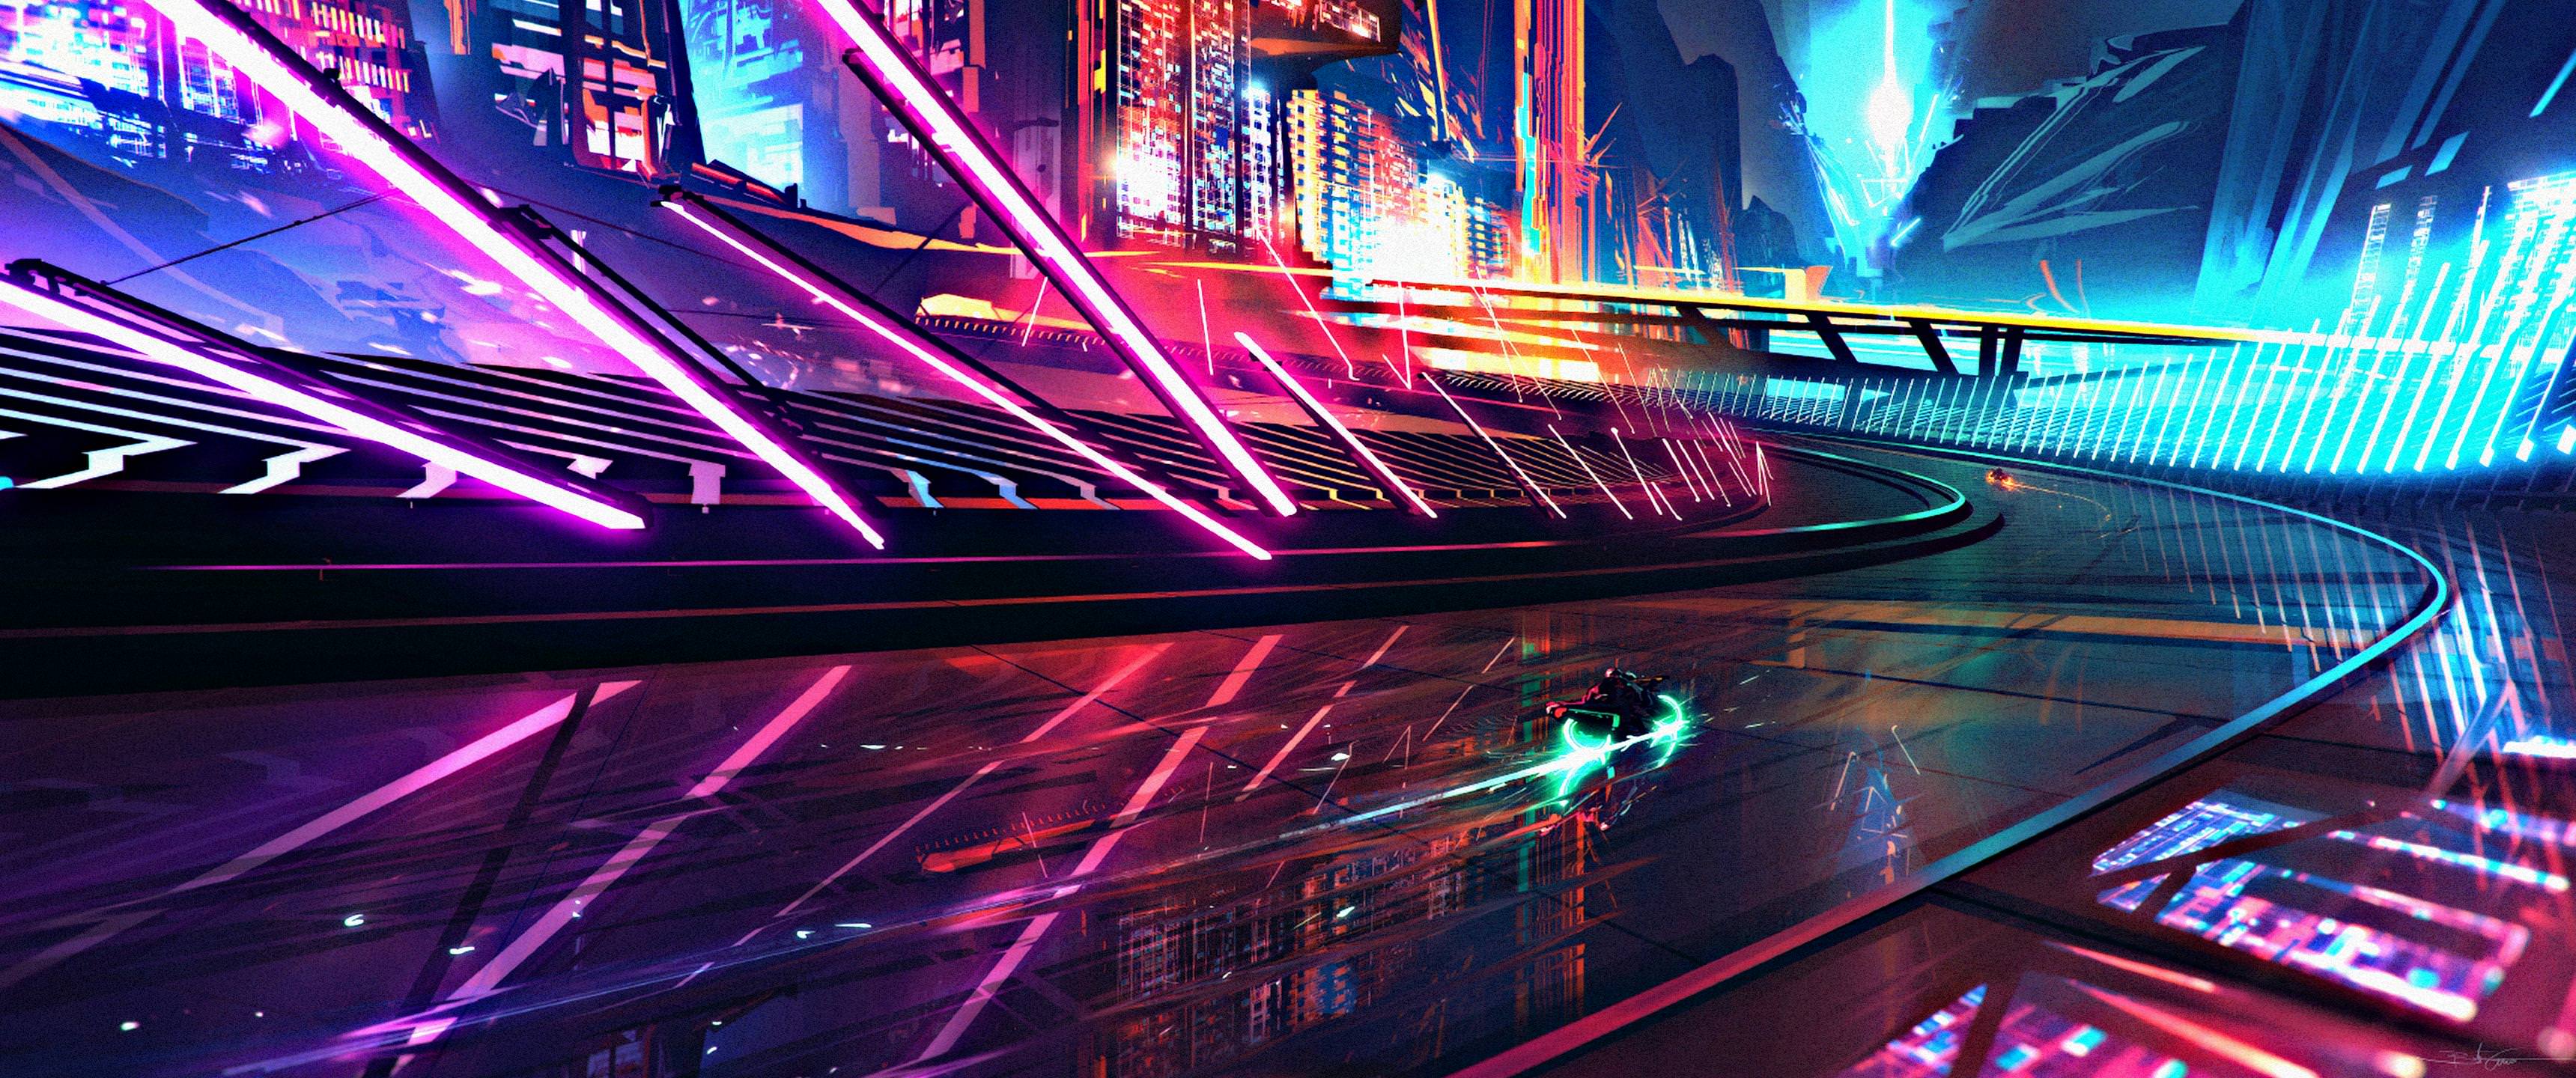 Cyberpunk city street with neon lights and a car - 3440x1440